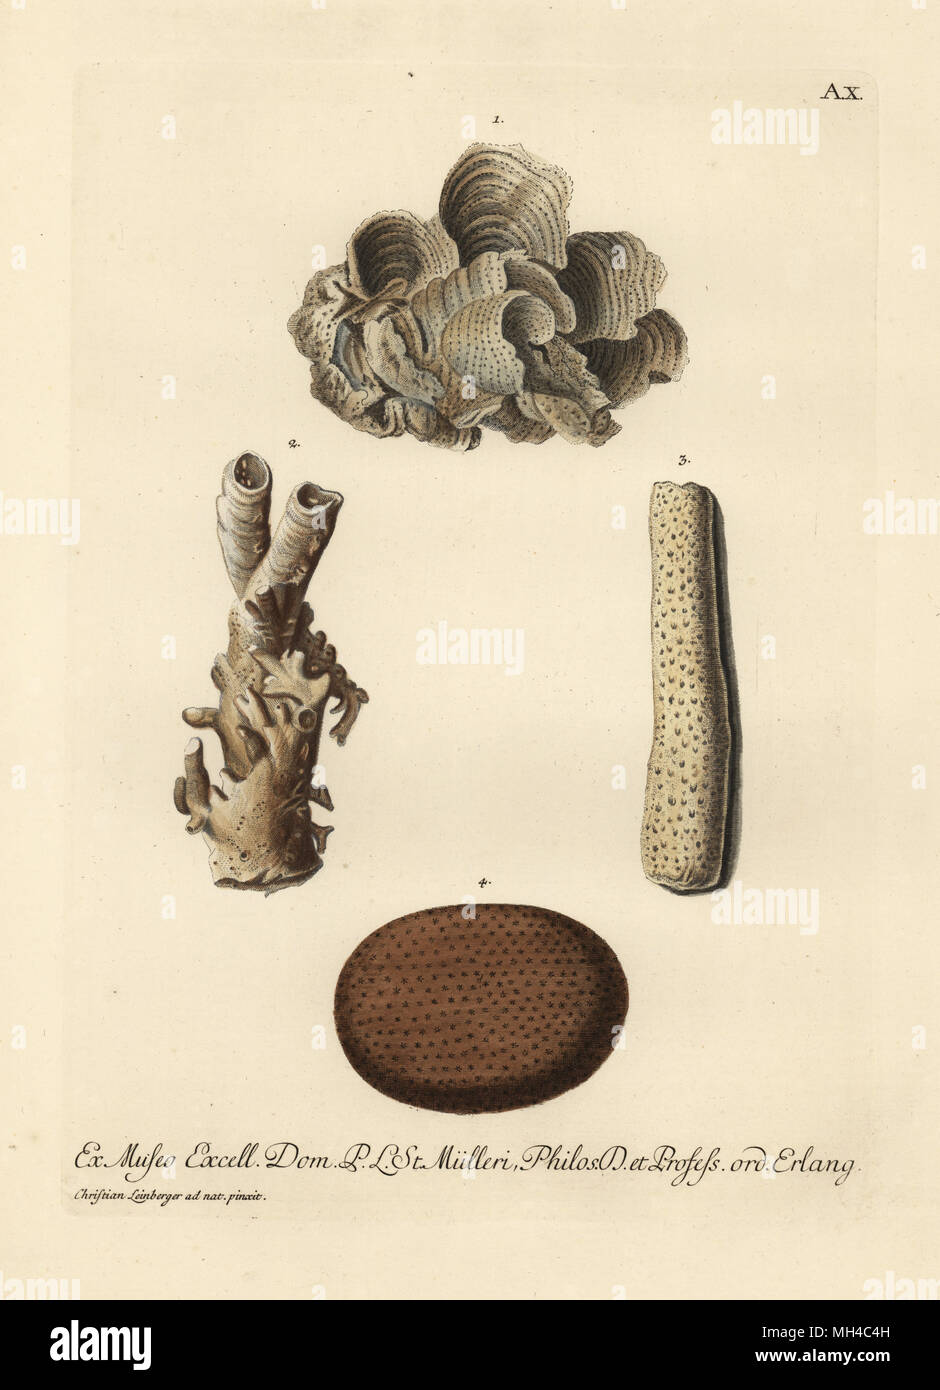 Lettuce coral, Agaricia agaricites, Madrepora agaricites 1, worm holes covered with stony coral 2, Acropora abrotanoides, Madrepora abrotonoides 3, and spherical clump of coral 4. Handcoloured copperplate engraving after an illustration by Christian Leinberger from Georg Wolfgang Knorr's Deliciae Naturae Selectae of Kabinet van Zeldzaamheden der Natuur, Blusse and Son, Nuremberg, 1771. Specimens from a Wunderkammer or Cabinet of Curiosities of P.L. Muller. Stock Photo